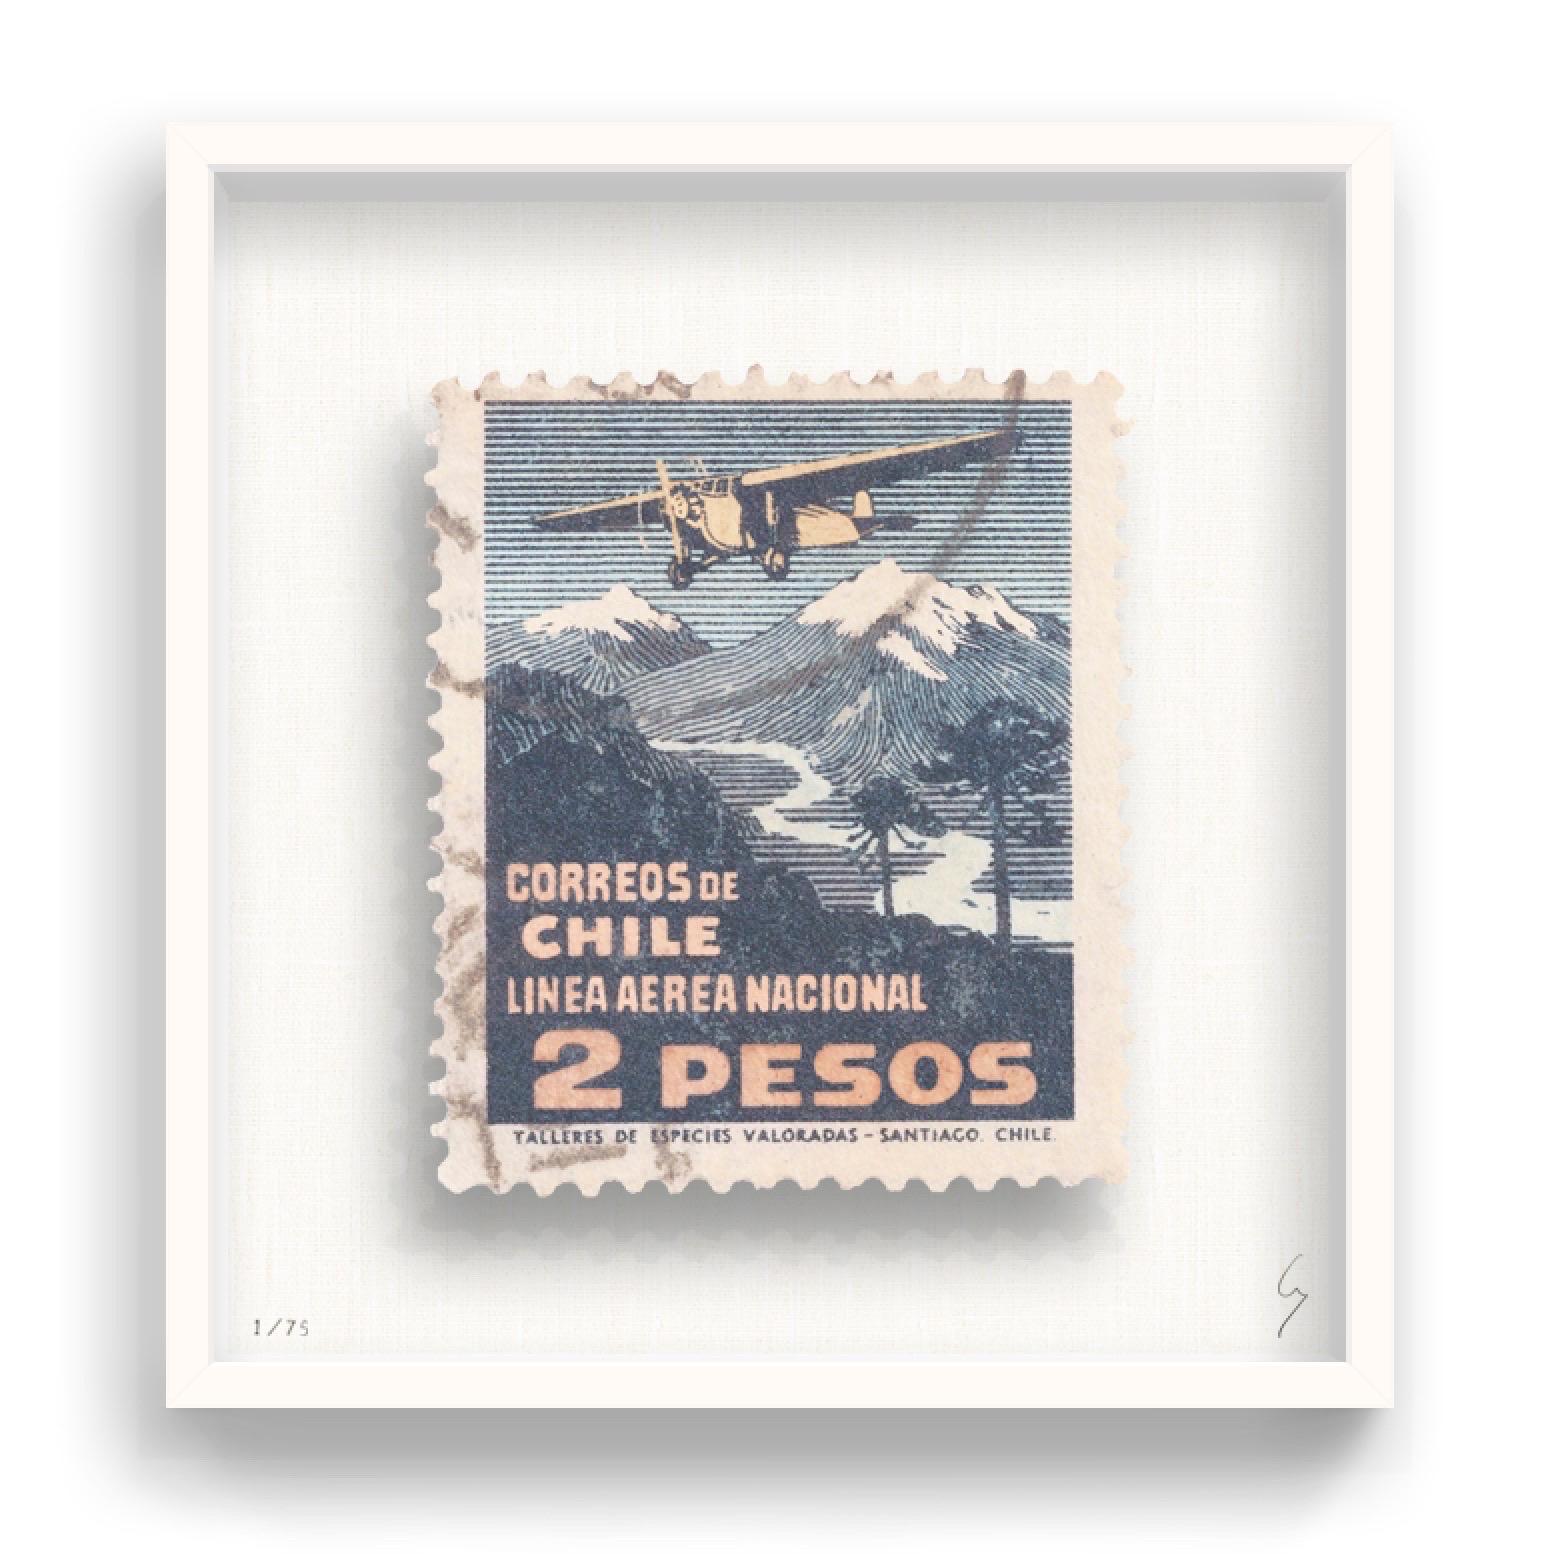 Guy Gee, Chile (medium)

Hand-engraved print on 350gsm on G.F Smith card
53 x 56cm (20 4/5 x 22 2/5 in)
Frame included 
Edition of 75 

Each artwork by Guy had been digitally reimagined from an original postage stamp. Cut out and finished by hand,